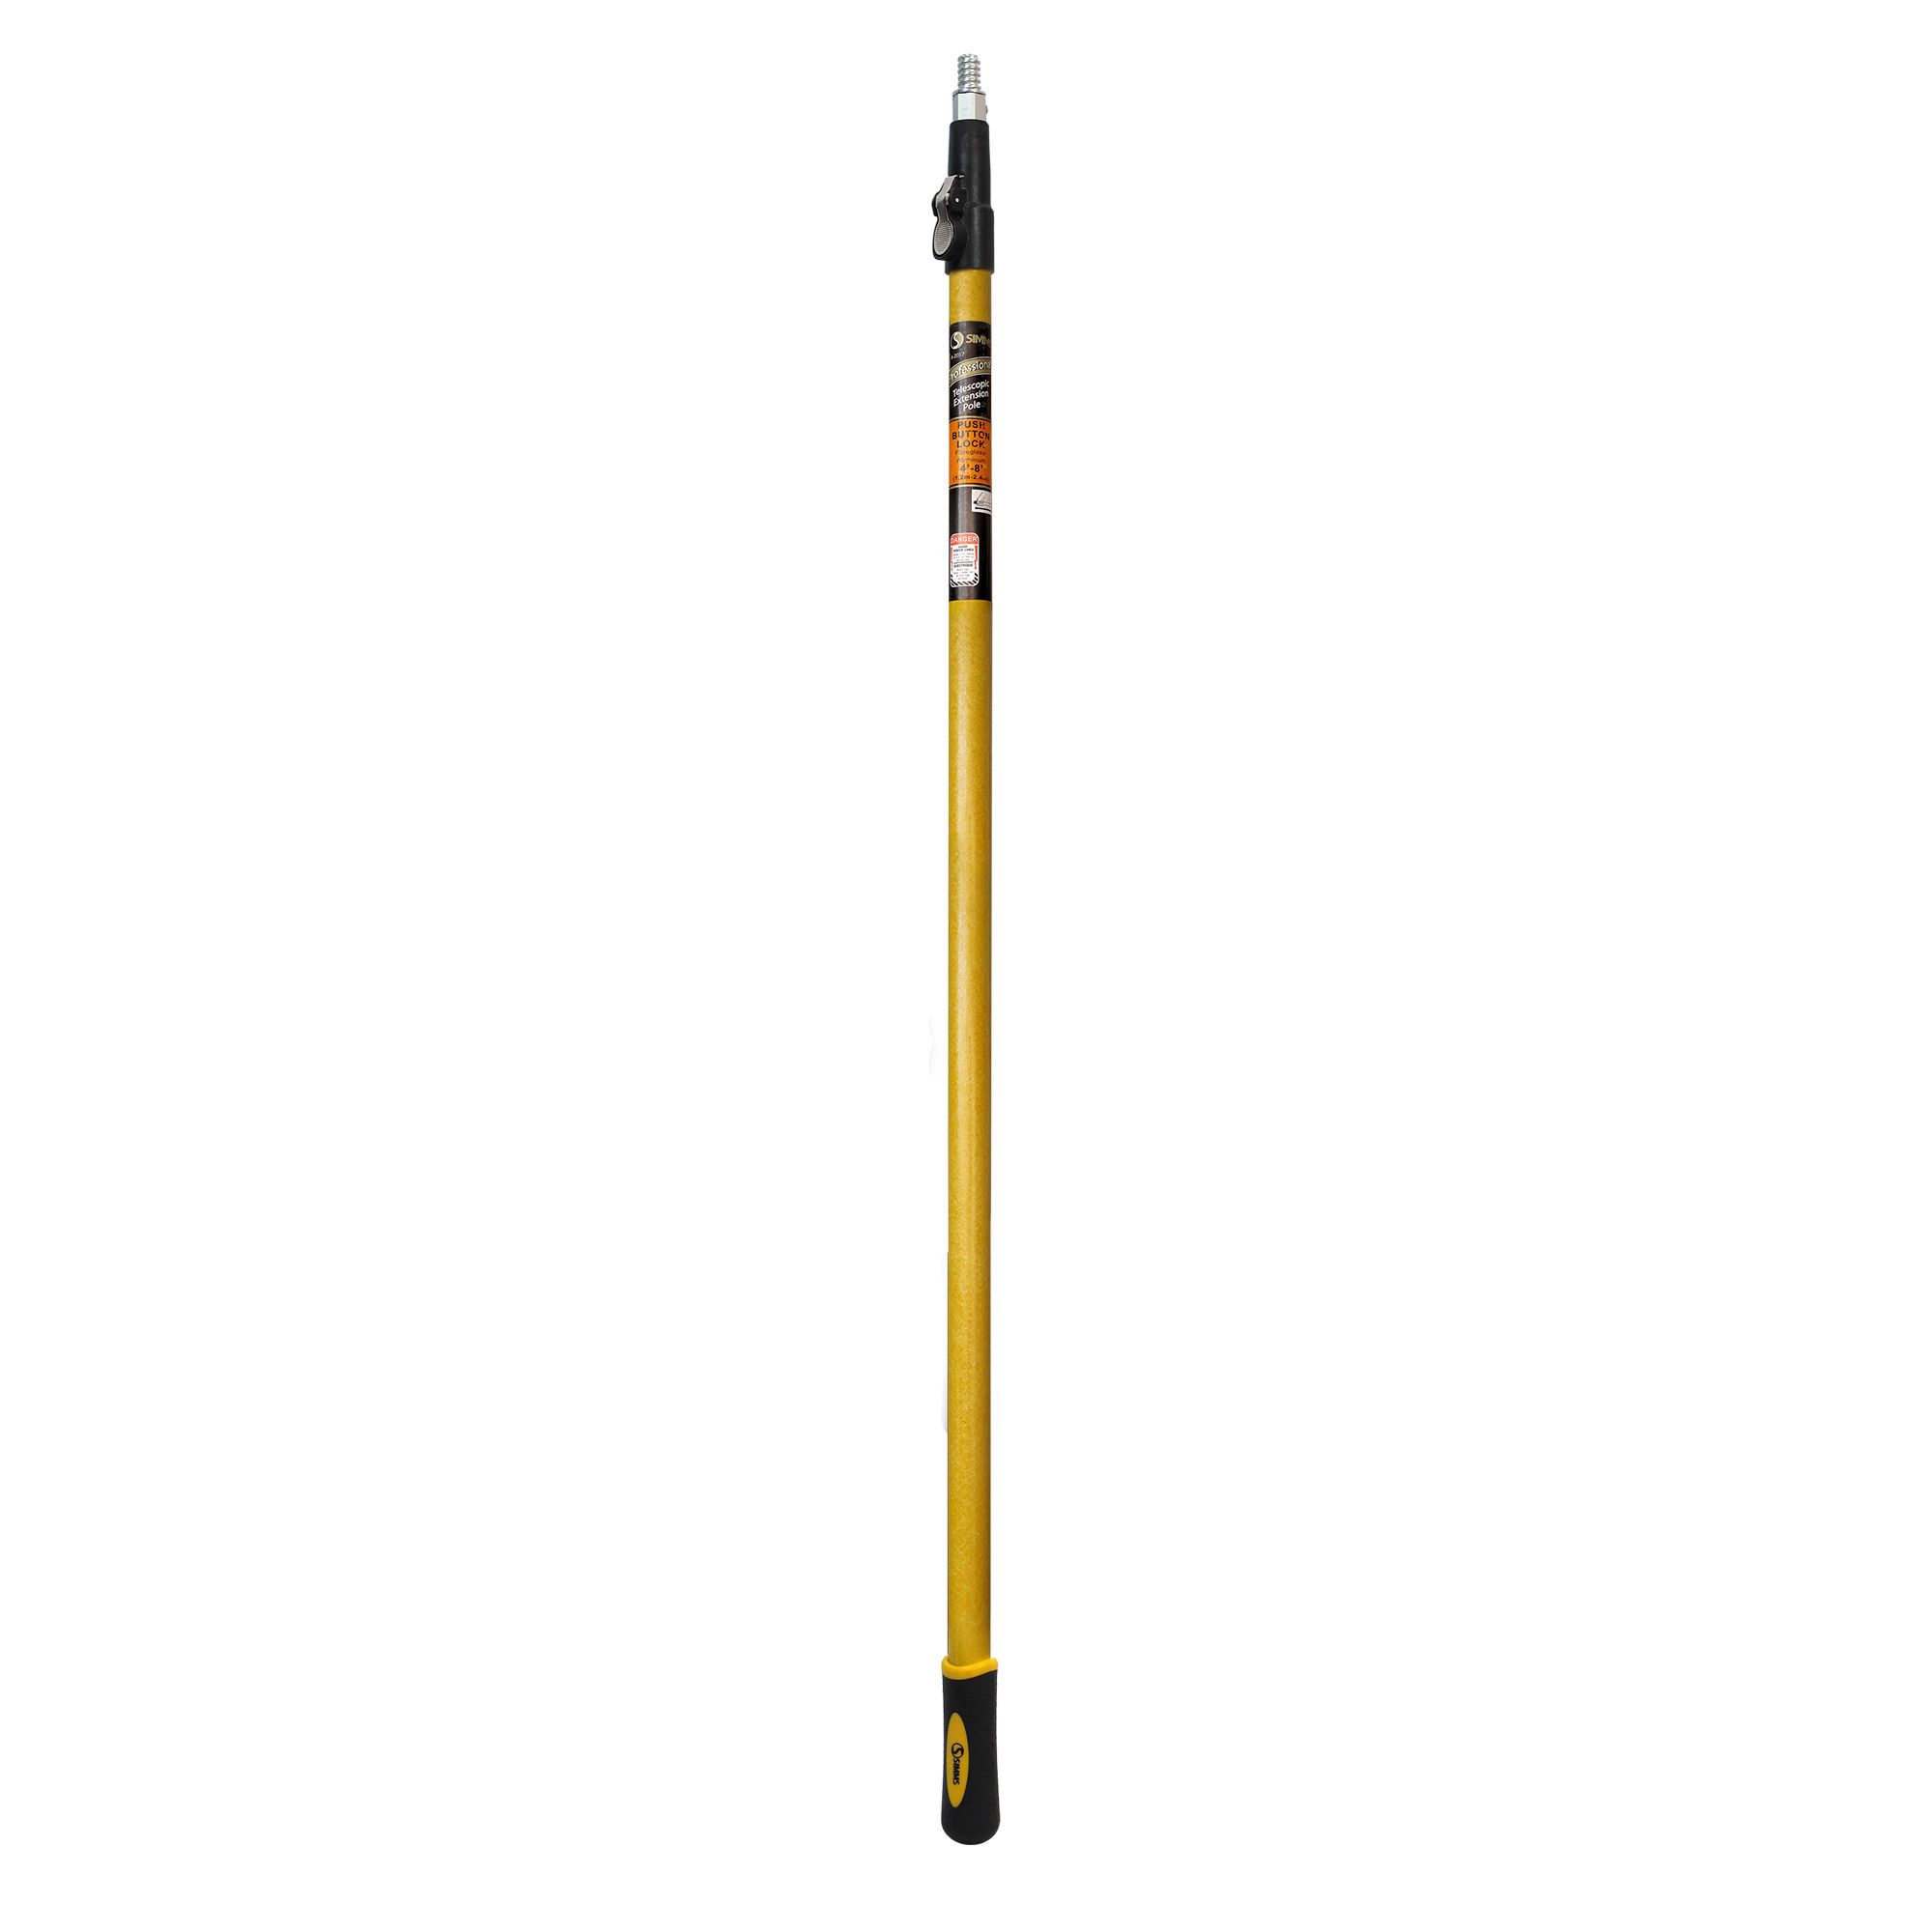 Telescopic Extension Pole - 4 - 8' from T.S. SIMMS & CIE